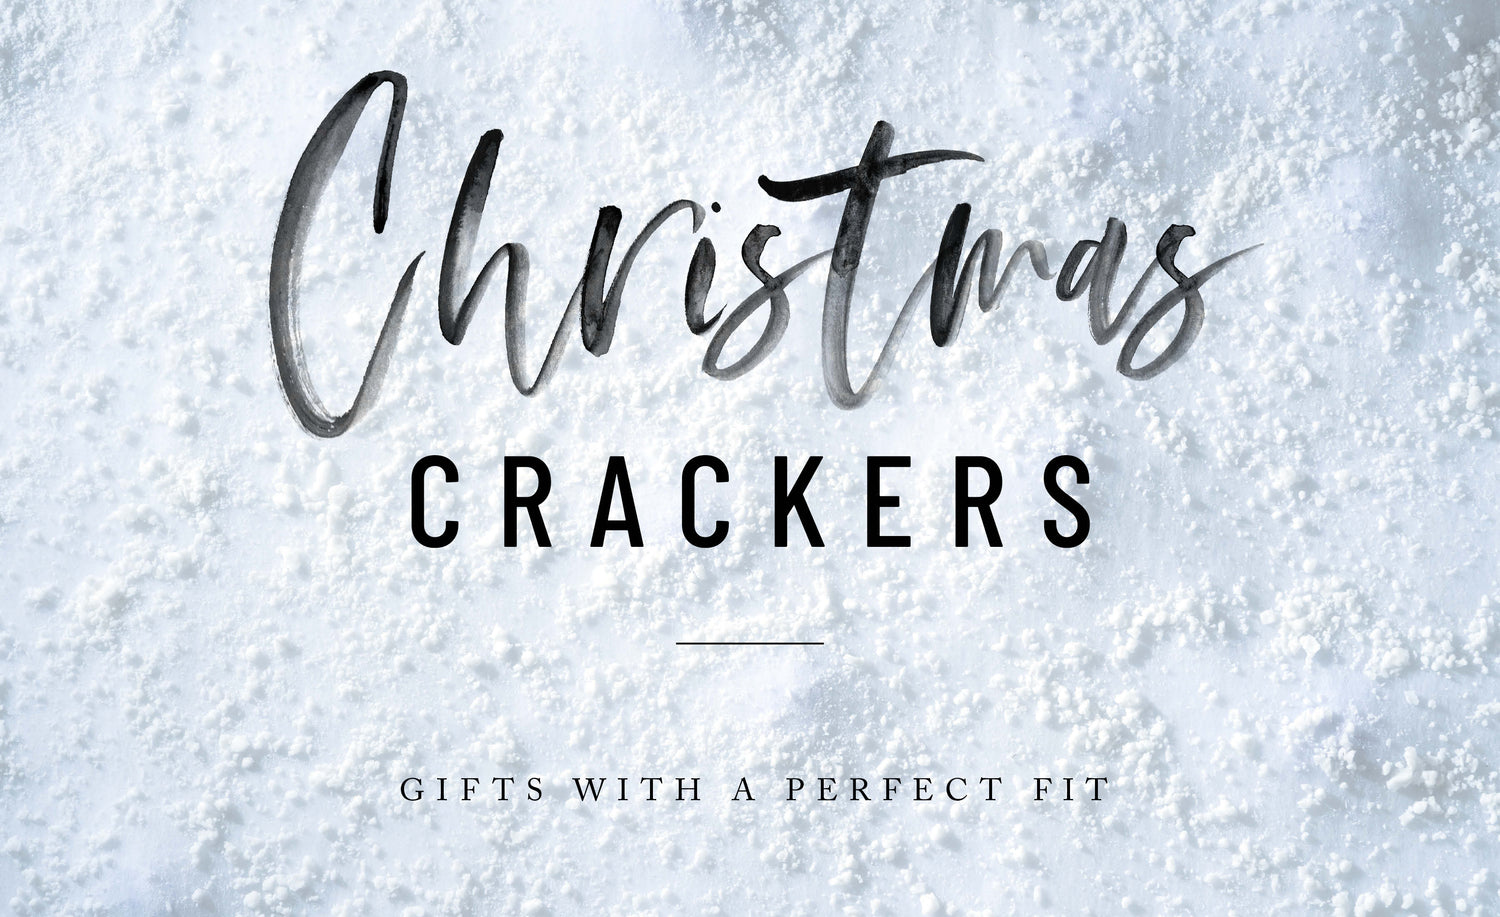 Christmas Crackers – Gifts with a perfect fit